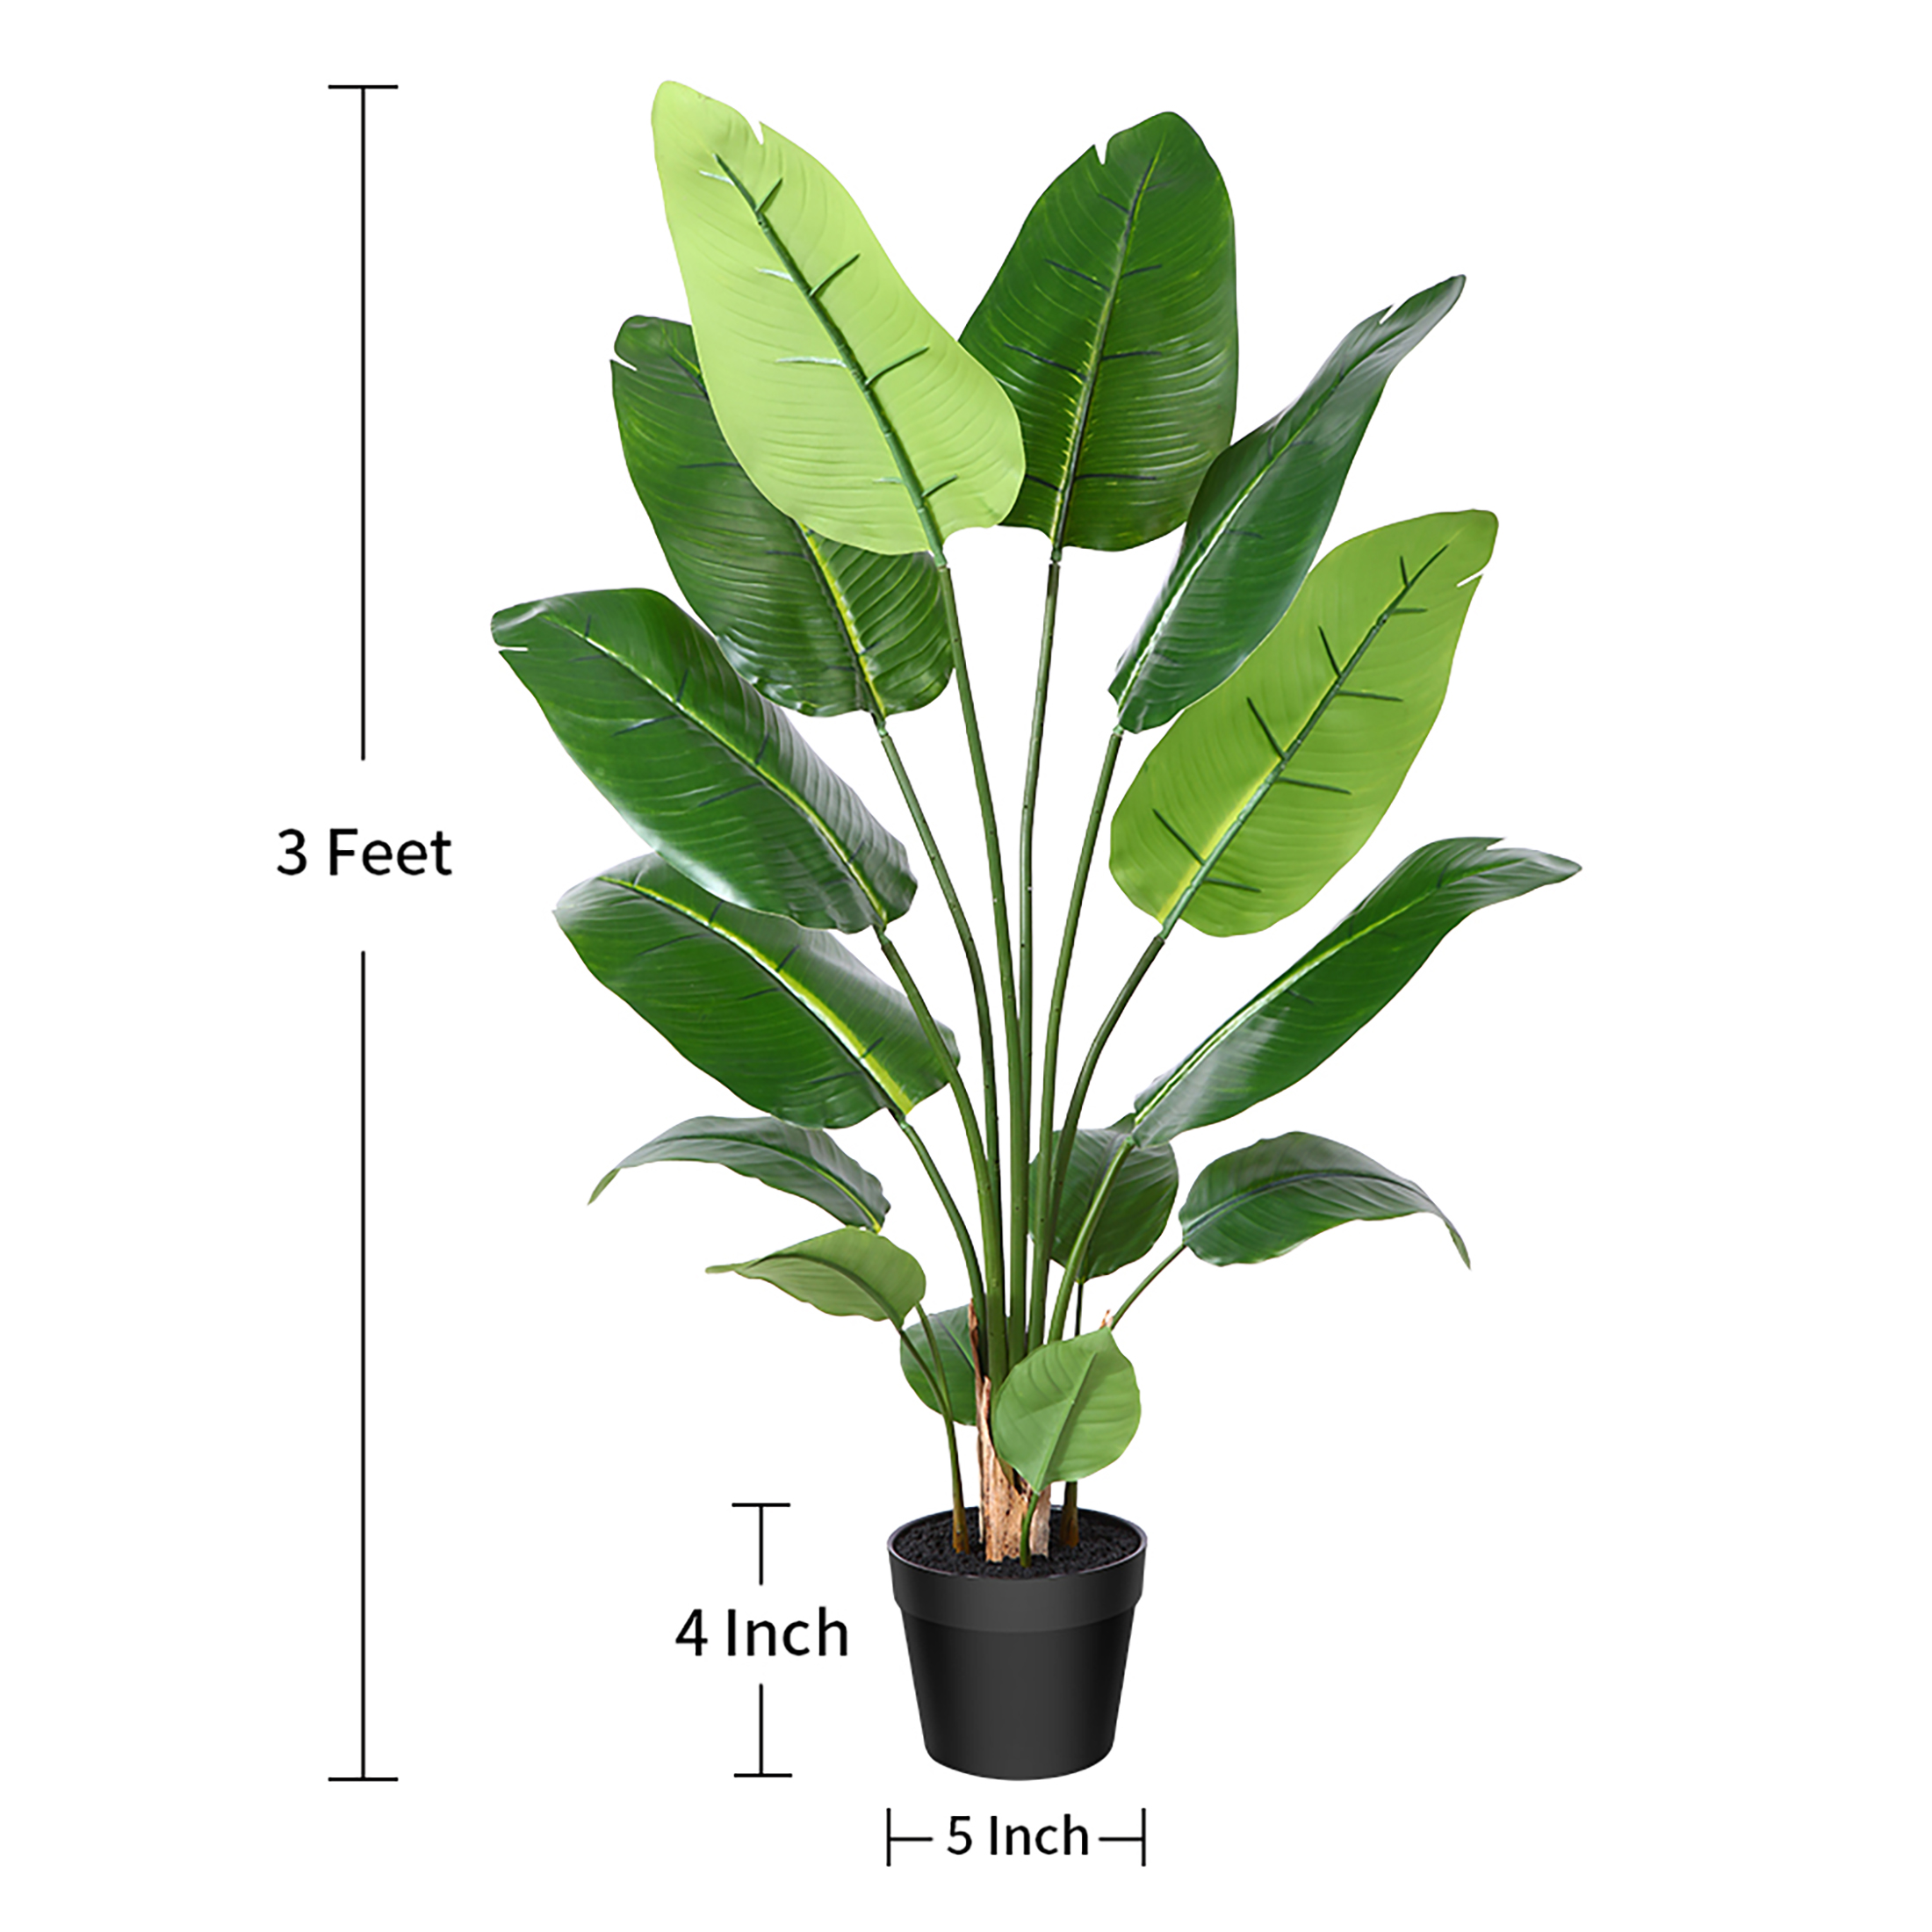 3FT Artificial Bird of Paradise Plant, Tall Fake Plants, Fake Tree of 14 Leaves for Indoor, Faux Plants for Office Home Living Room Floor Patio Greening Porch Decor, Set of 1 - image 5 of 8